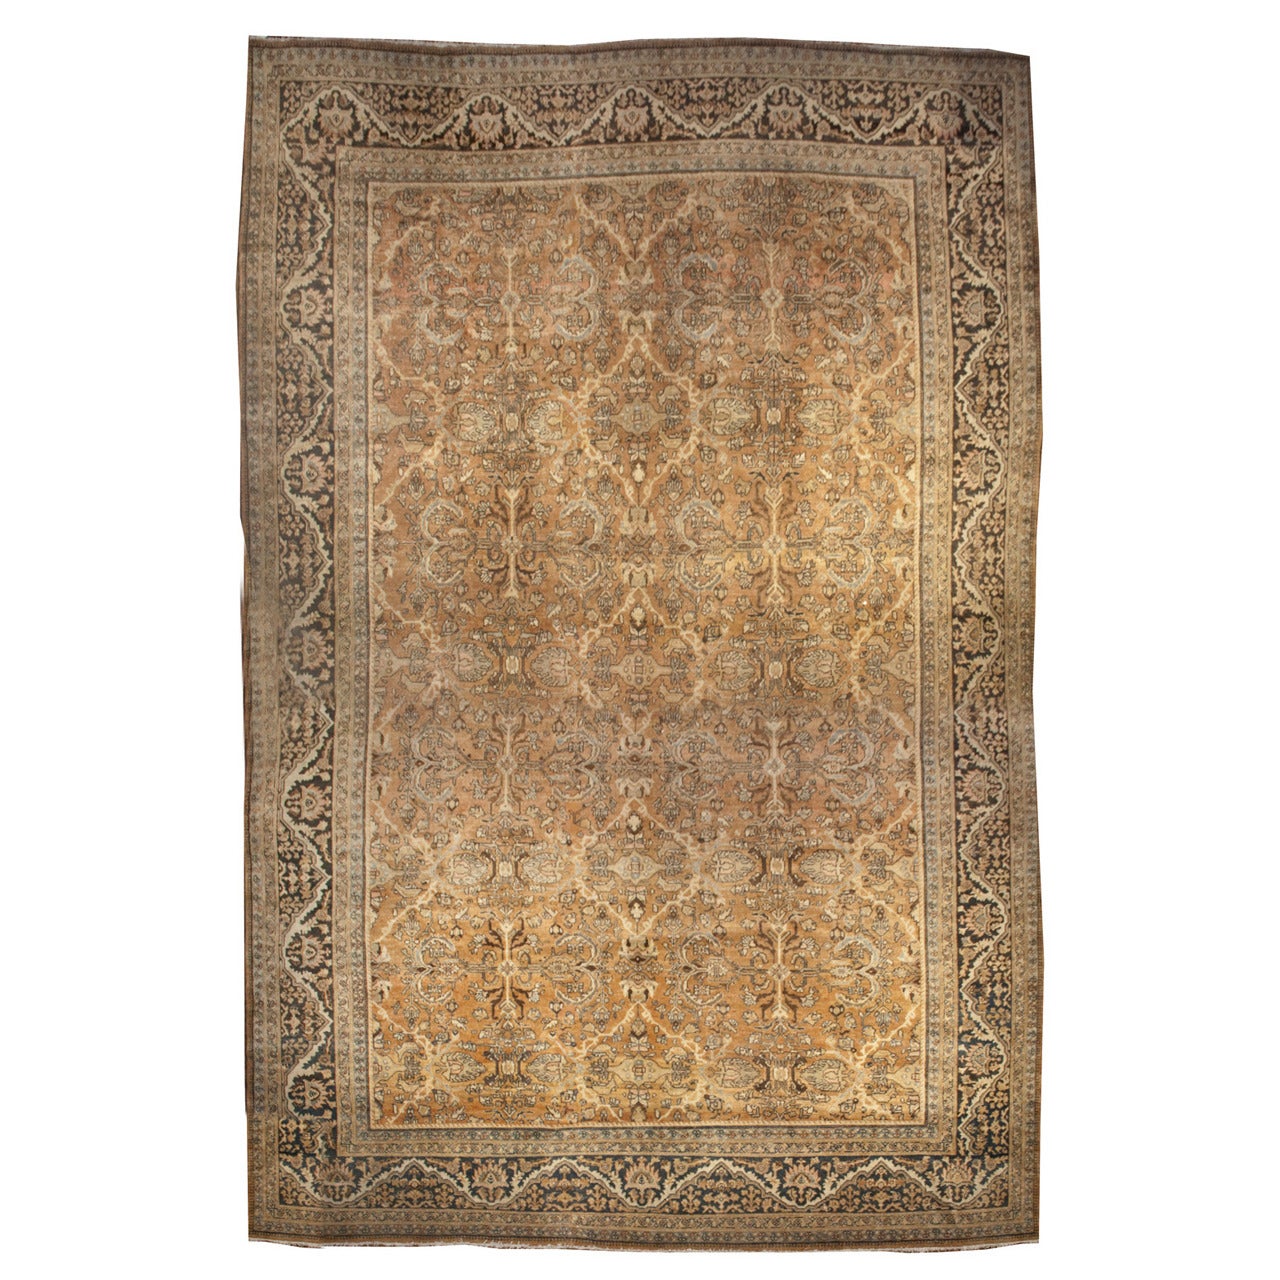 Early 20th Century Mahal Sultanabad Rug